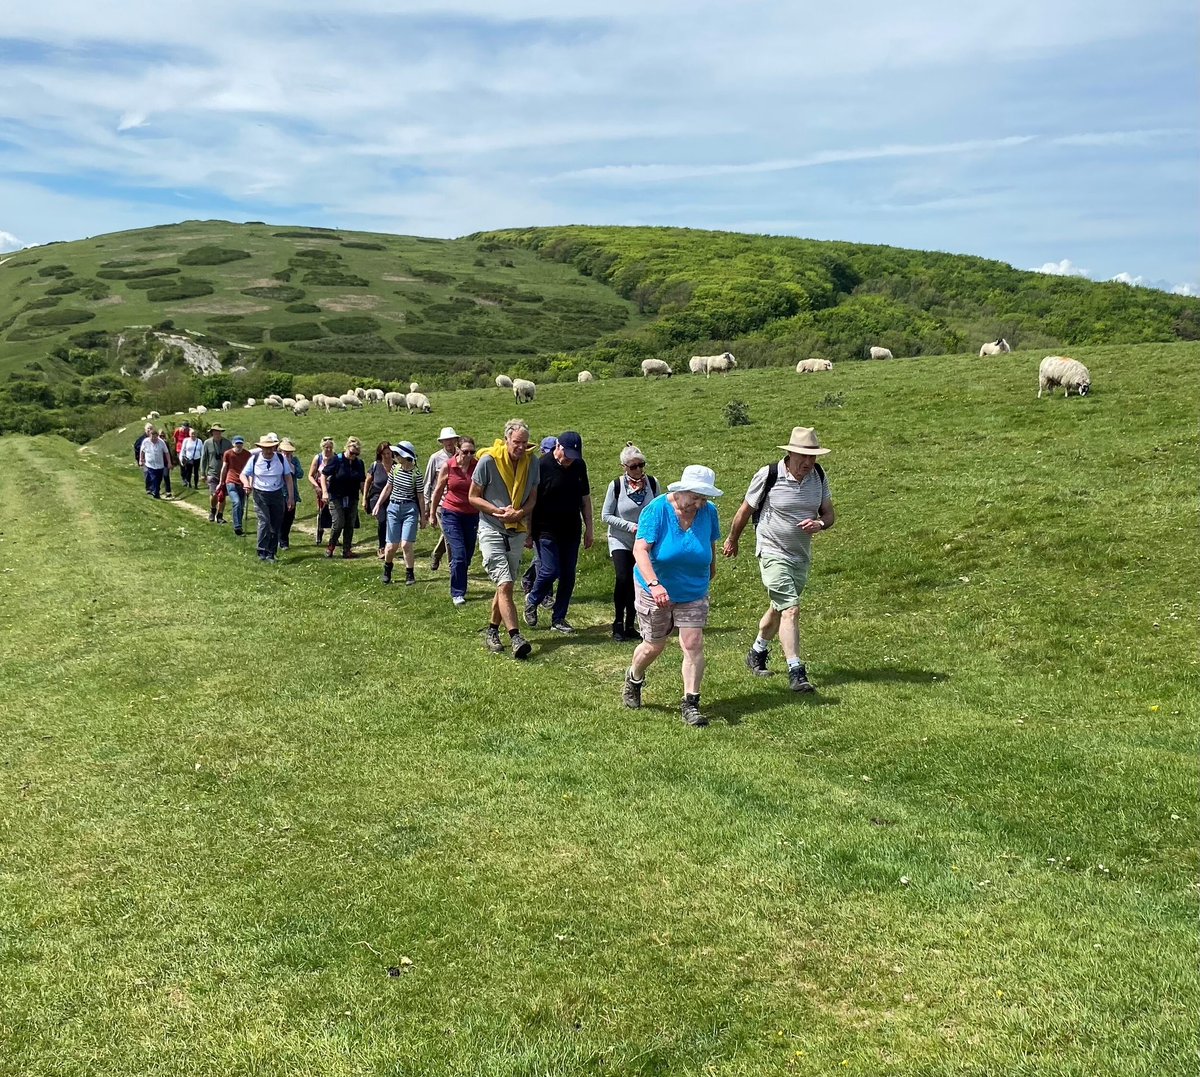 Today’s ‘Part of the Warrior Trail’ walk around @ntisleofwight’s Mottistone with @IoWBobSeely.🌿🥾 Taking in the countryside where the original War Horse named ‘Warrior’ spent his days with owner General Jack Seely.🐎 Thanks to those who attended & to @iowbobseely for hosting!